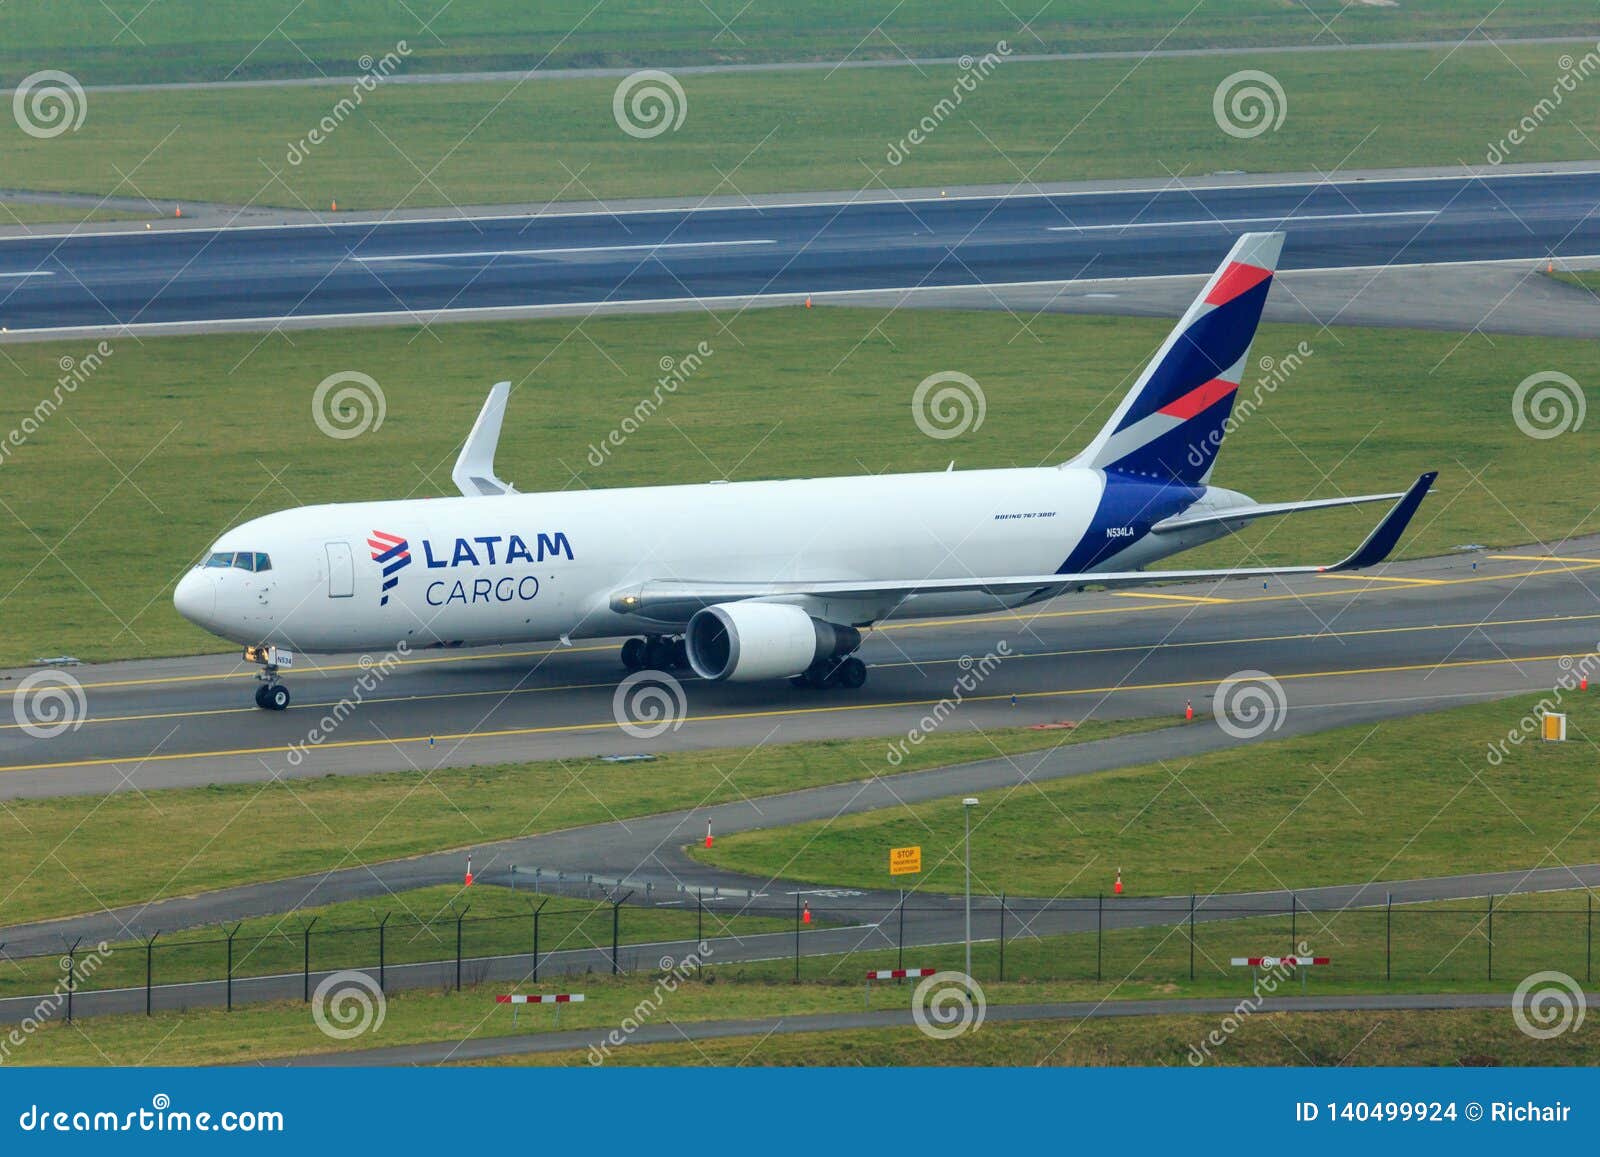 https://thumbs.dreamstime.com/z/latam-cargo-boeing-freighter-taxiing-taxiway-140499924.jpg